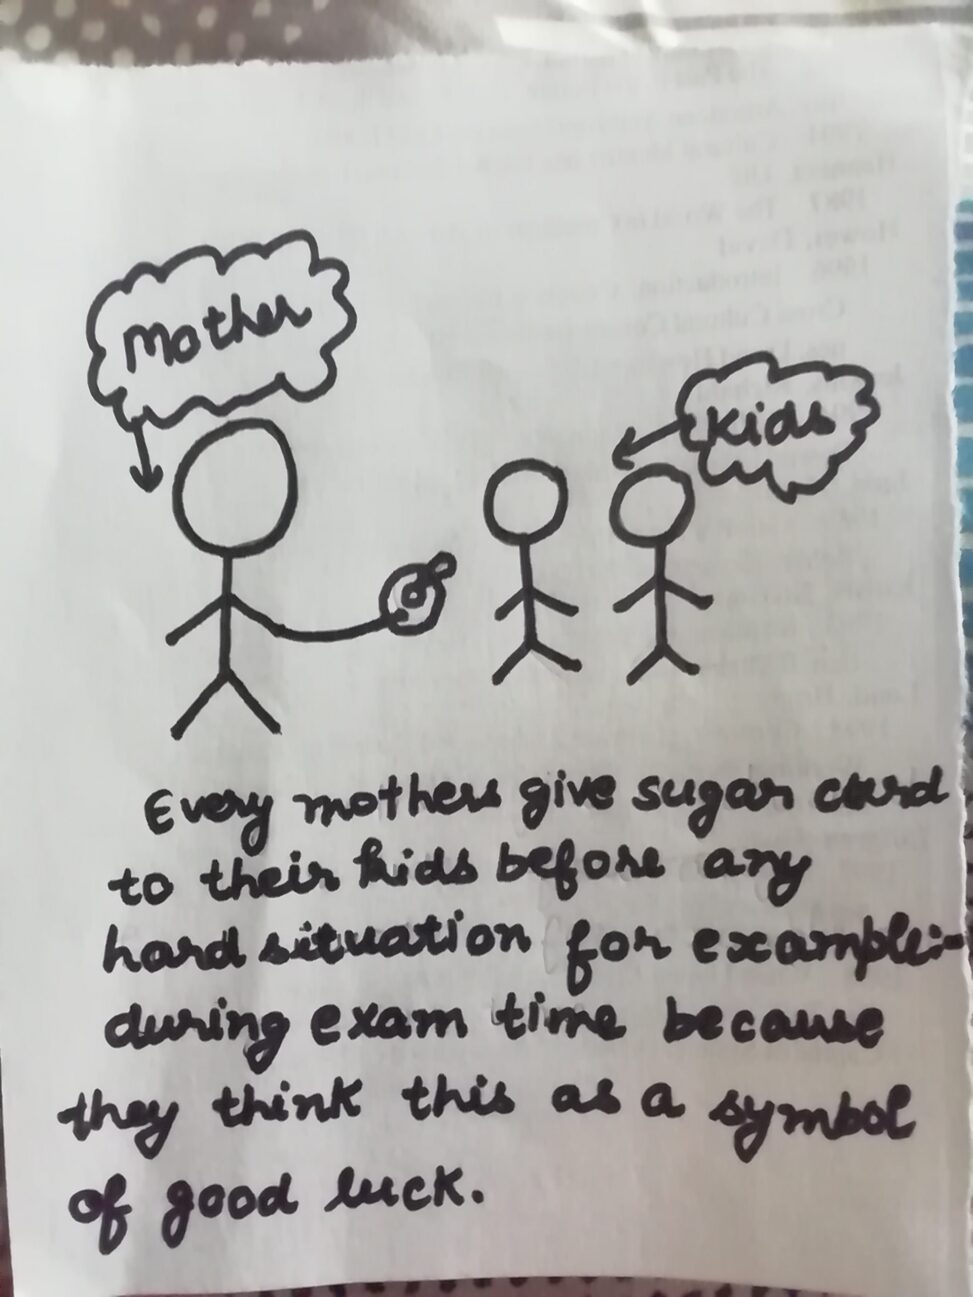 The stick figure above shows the seen of a mother when she is giving curd sugar to their children before going to exam.en